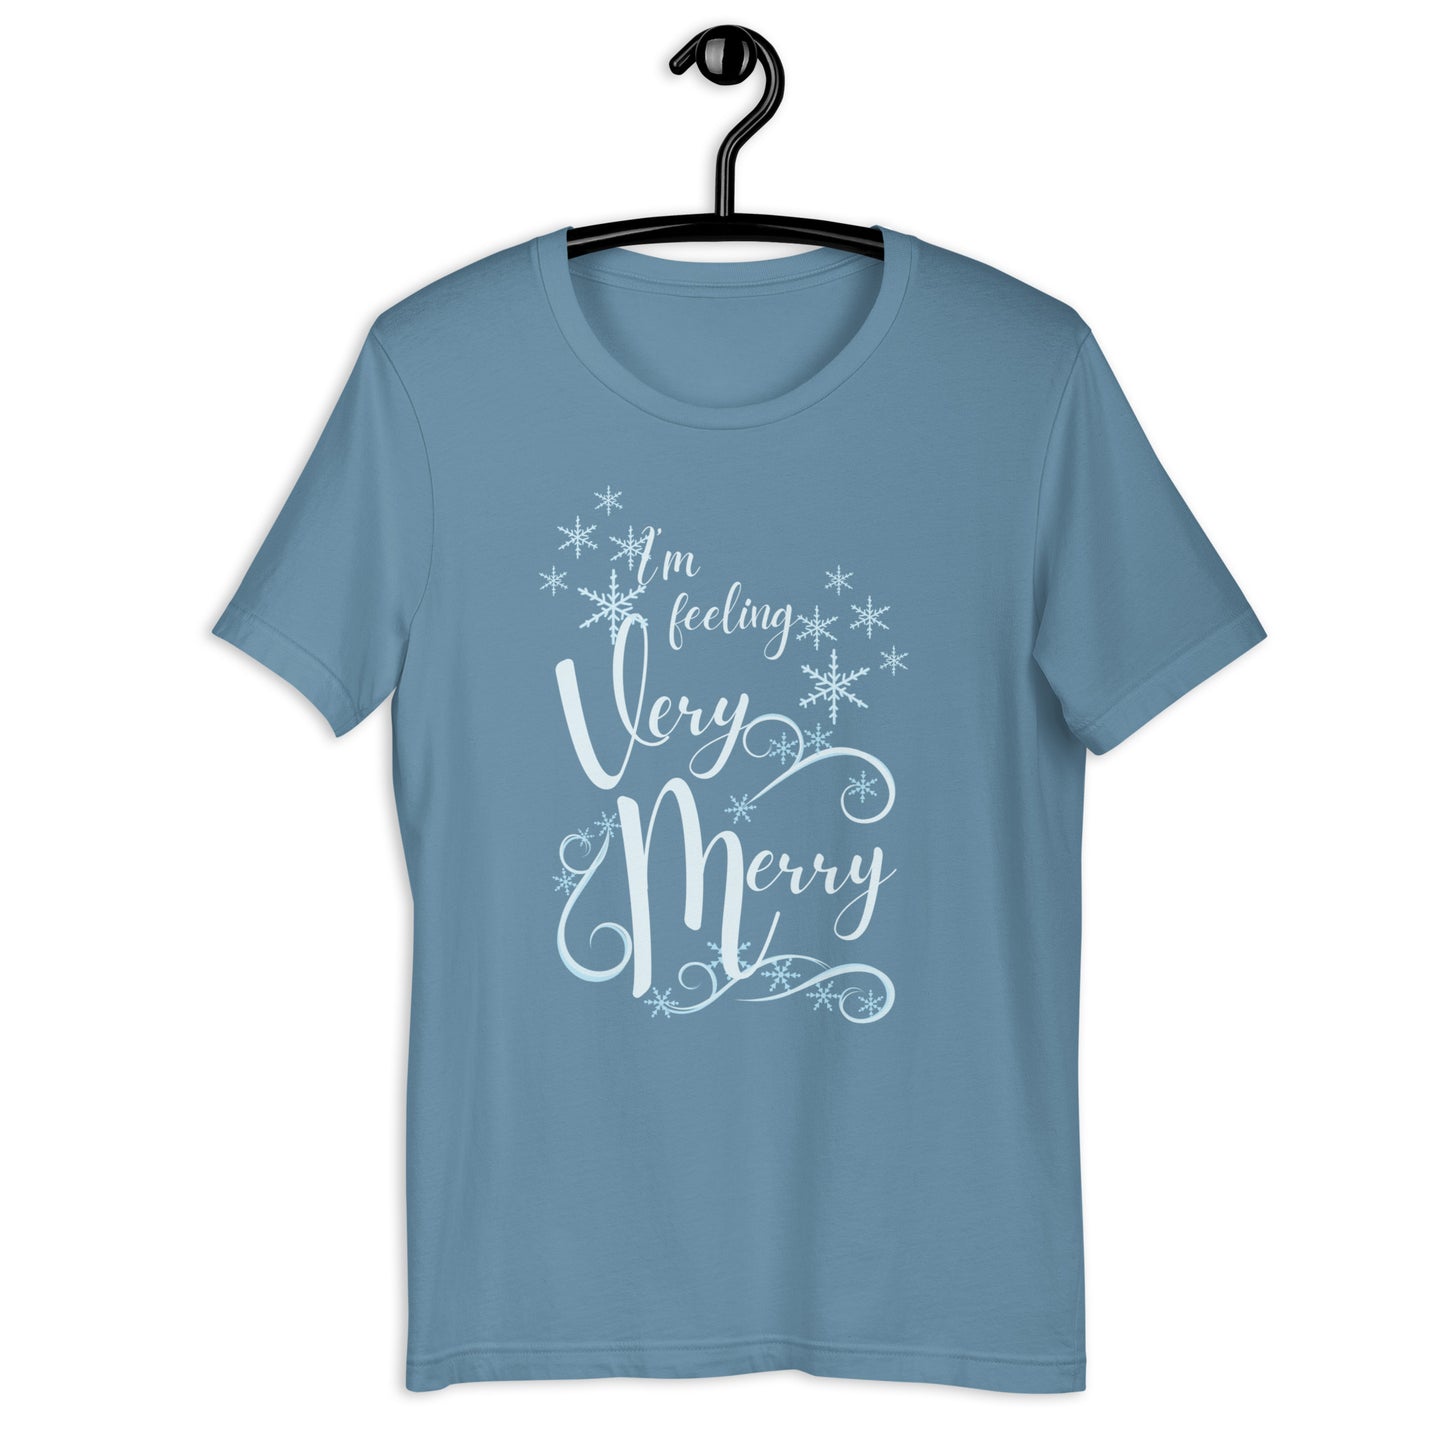 Very Merry Christmas Party Unisex t-shirt